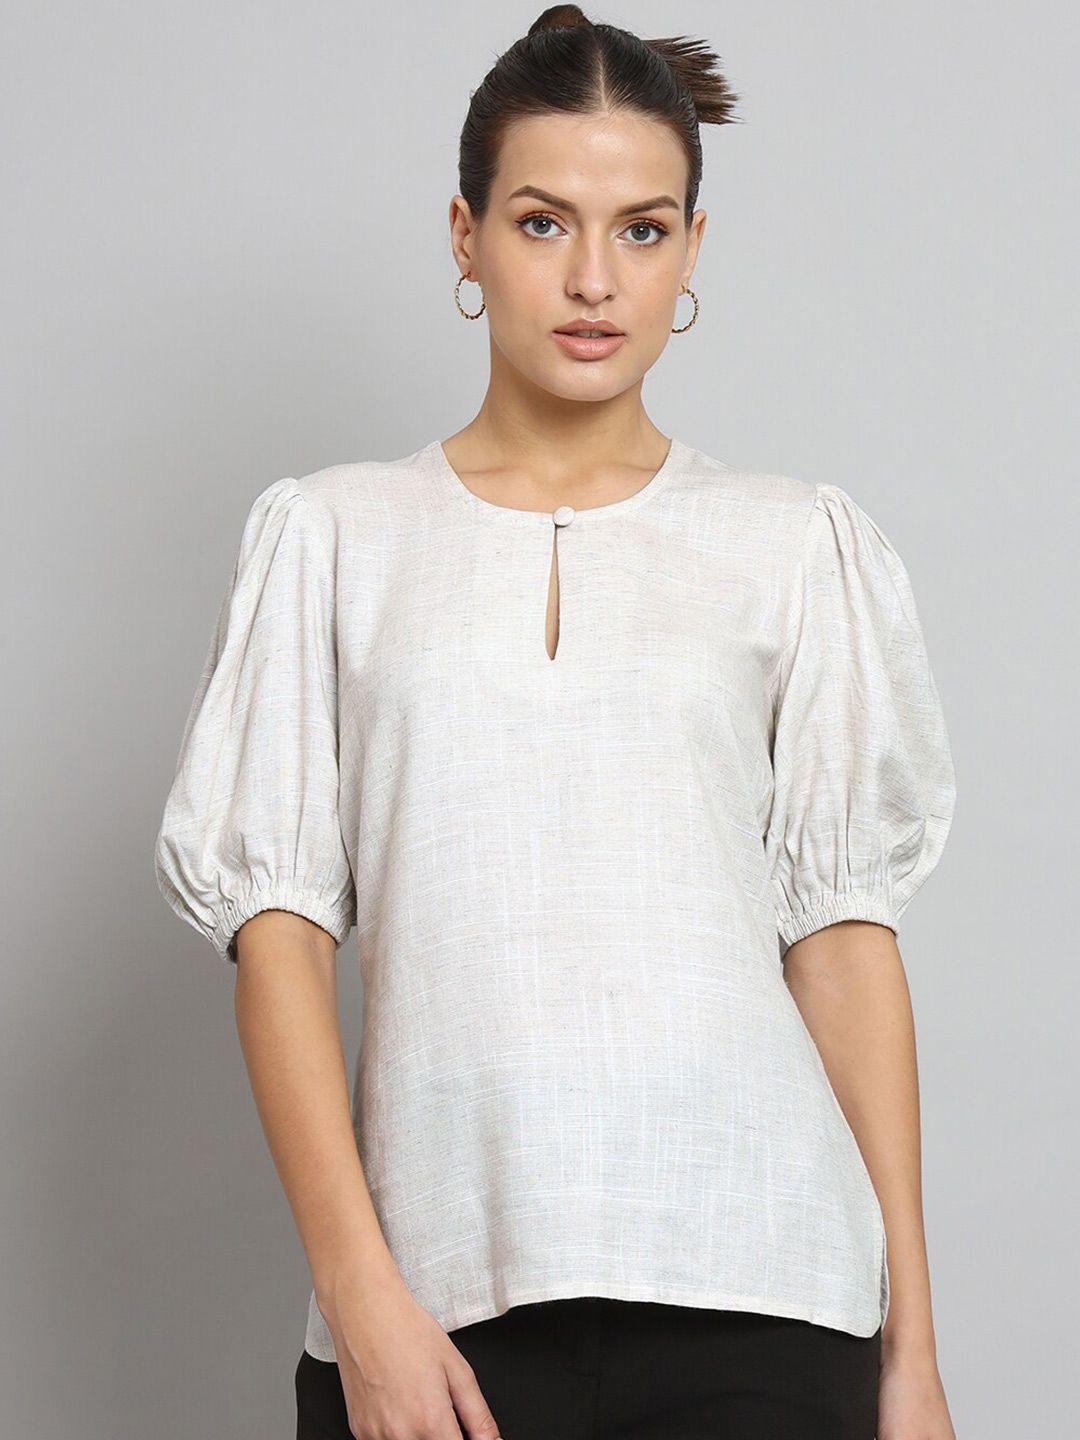 powersutra keyhole neck puff sleeves top